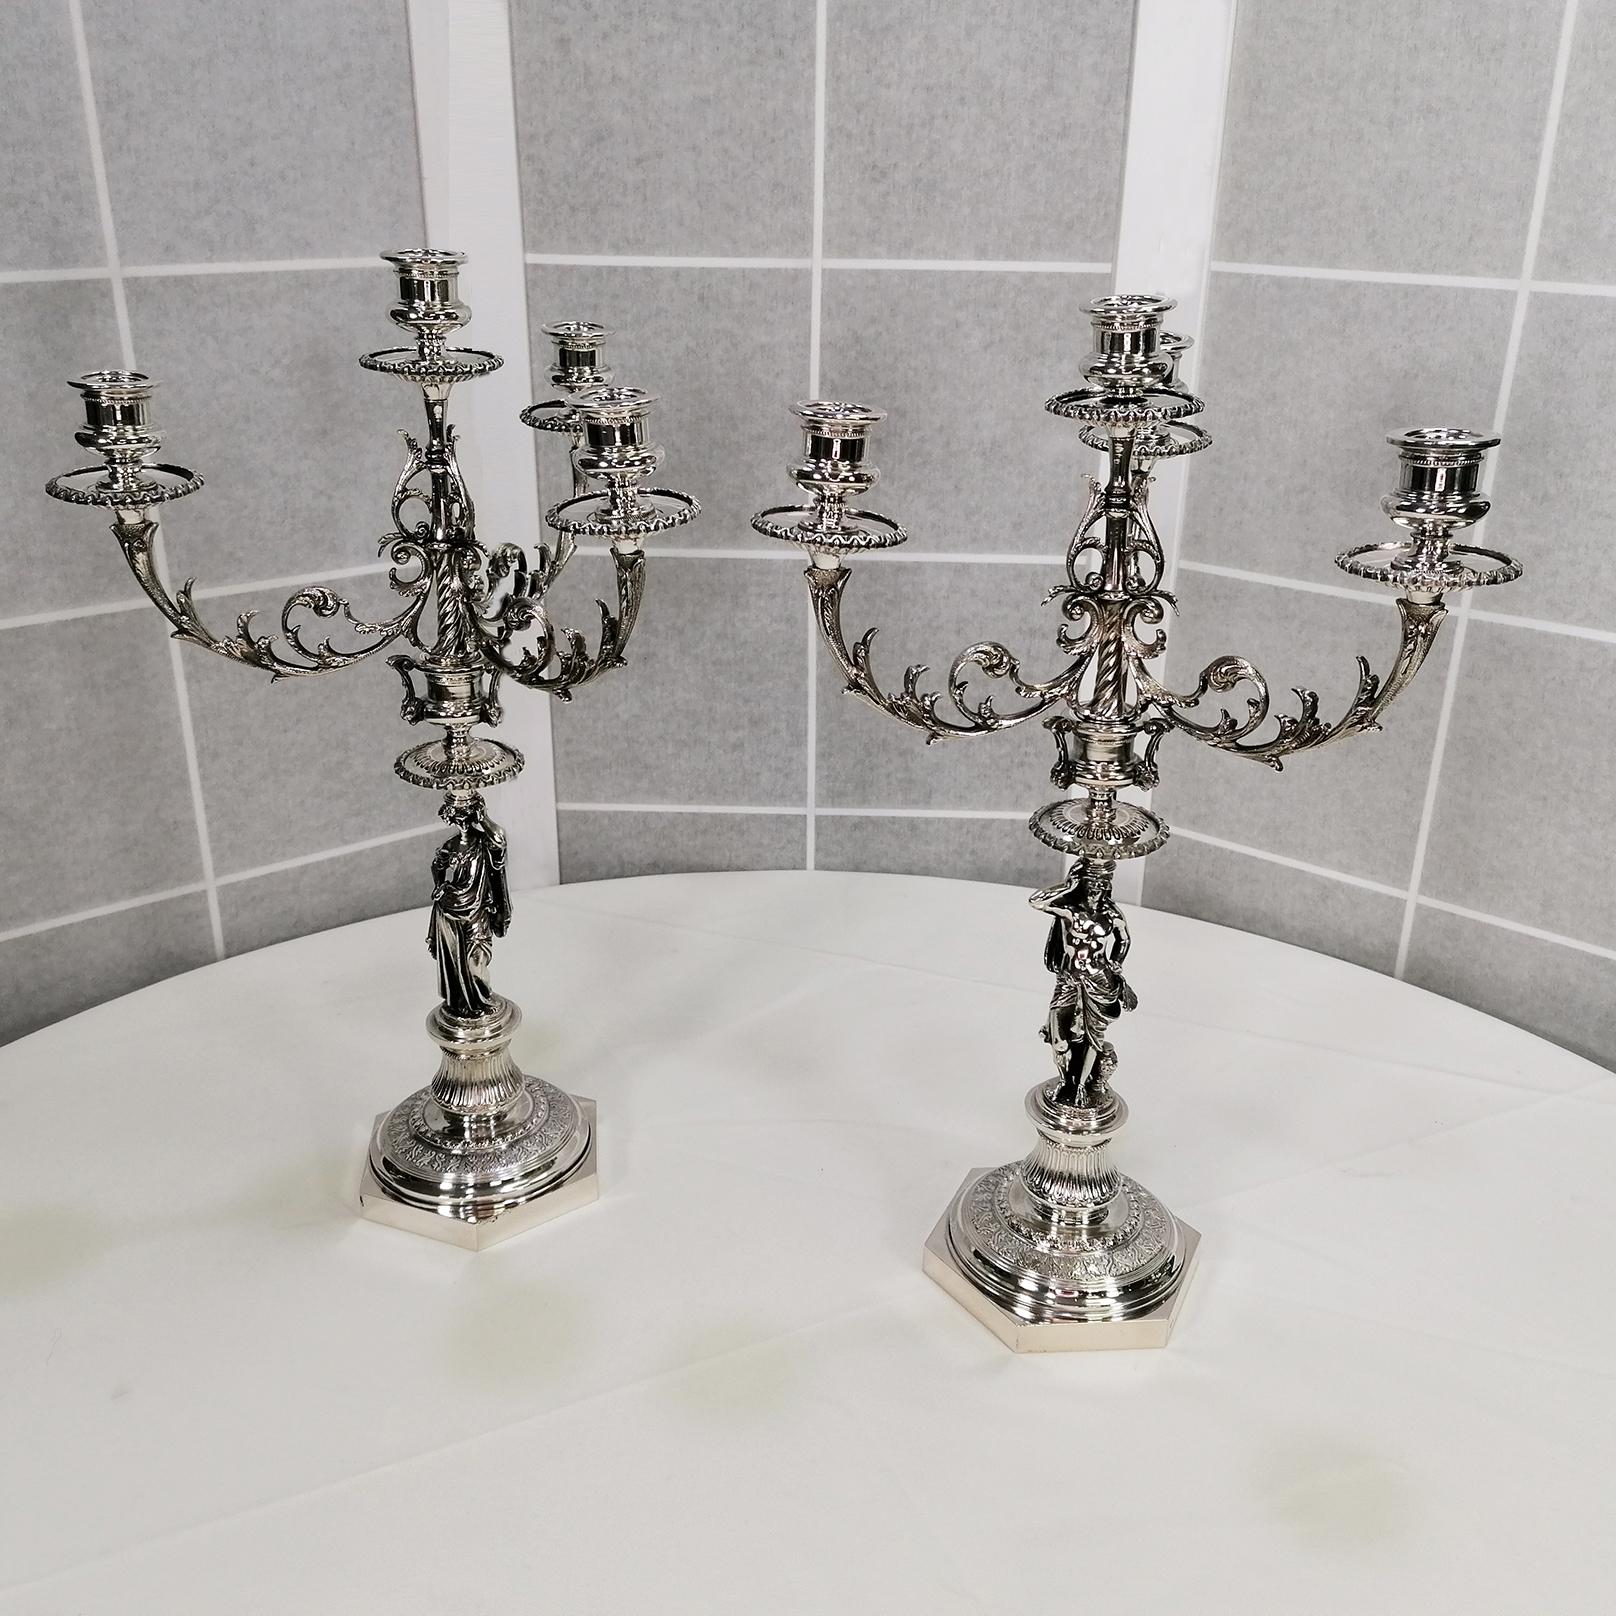 Pair of Italian 4-flame candelabra in neoclassical style.
The base is smooth hexagonal topped by a finely chiseled round base engraved with grooved column motifs.
A Greek Goddess made with the casting technique holds the arms of the candelabra, also